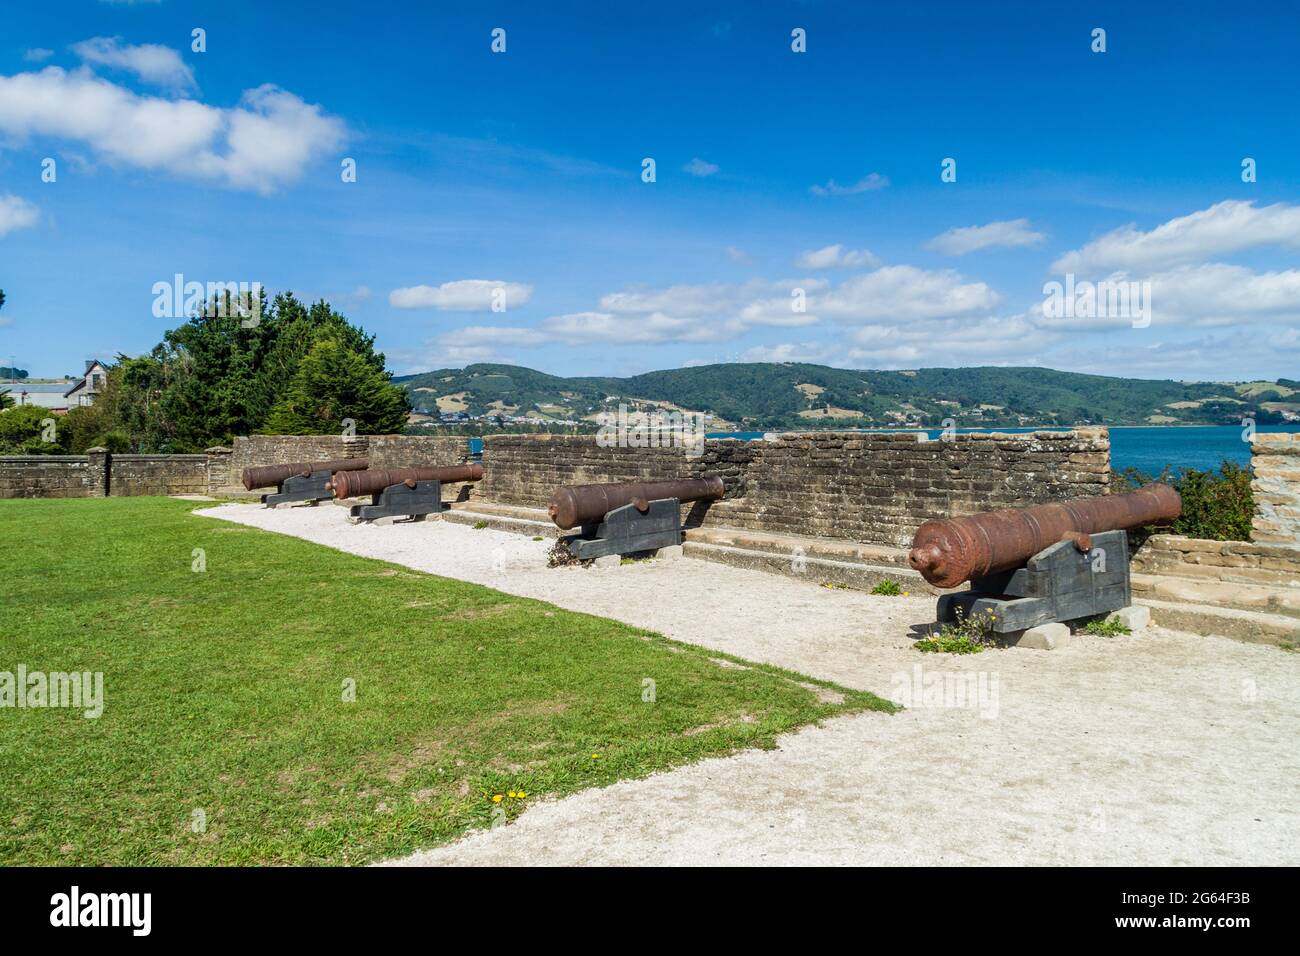 Cannons on a fortification of a fort Fuerte San Antonio in Ancud, Chiloe island, Chile Stock Photo